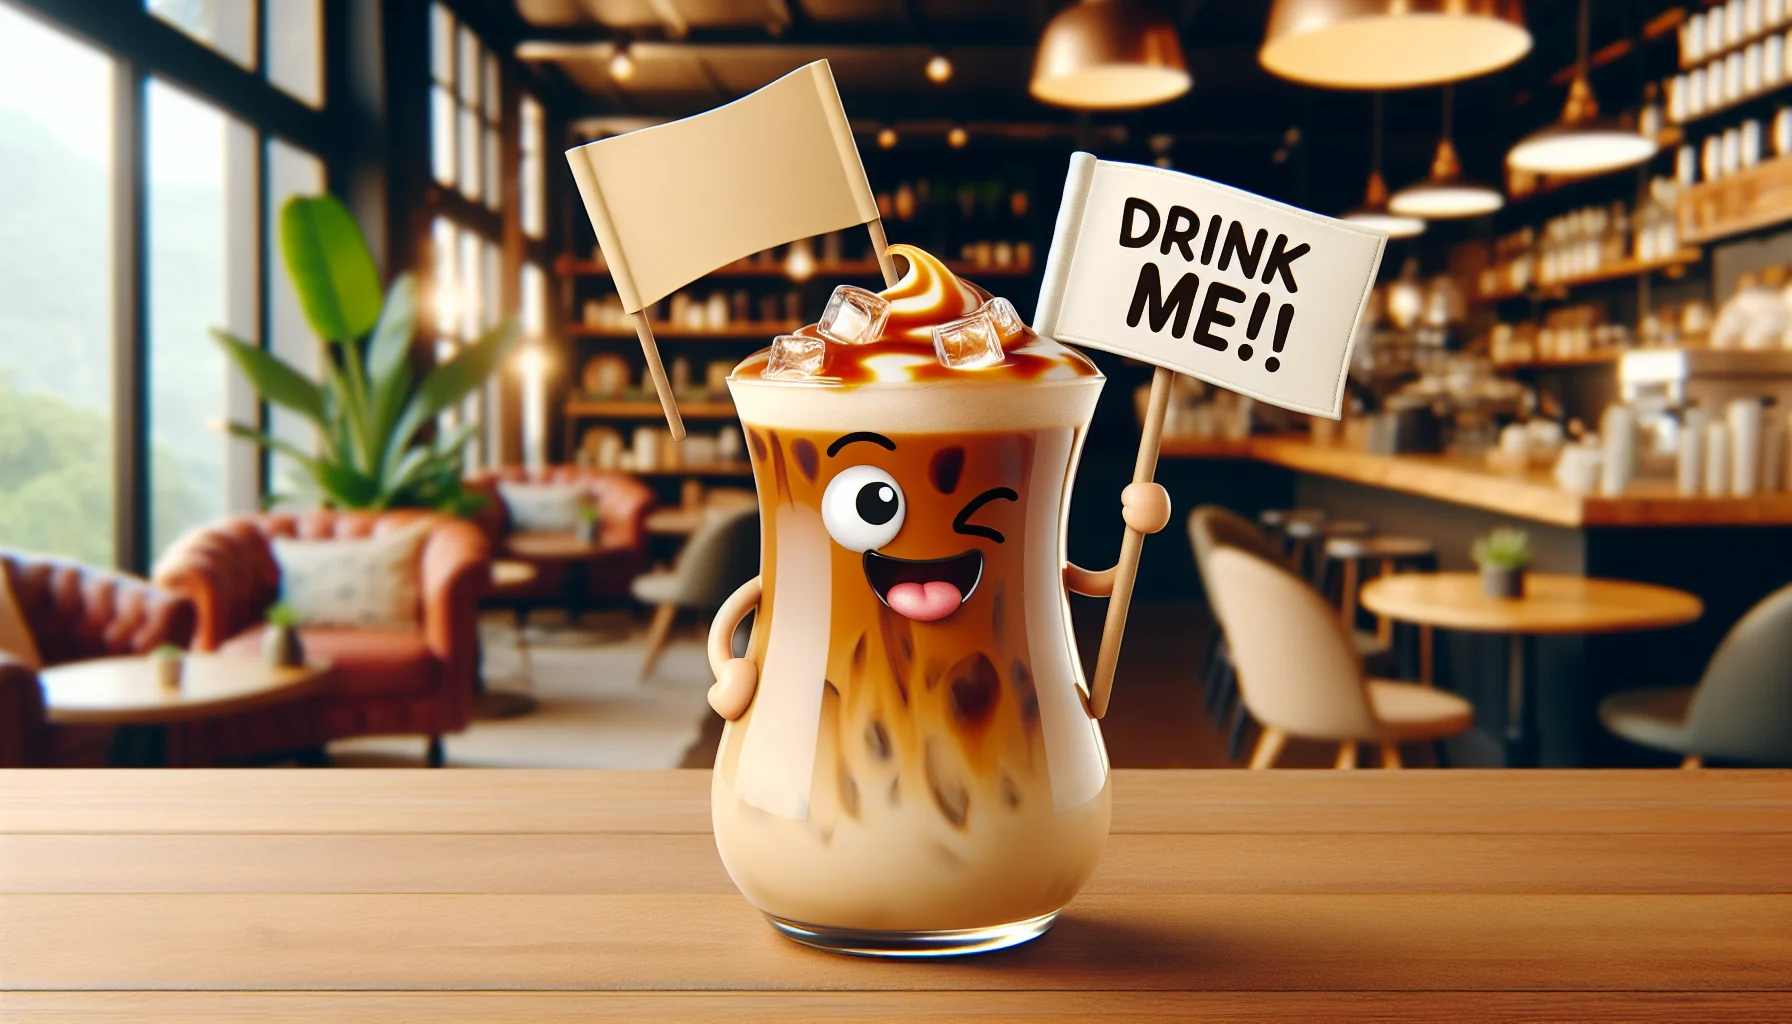 Create a playful and humorous scene with a realistic image of an iced caramel latte. Imagine the latte has sprouted cartoon arms and is winking while holding a mini flag that says 'Drink Me!'. It is placed on a wooden table. In the background, you can see a cozy, warmly lit coffee shop interior with comfortable chairs and plants all around.